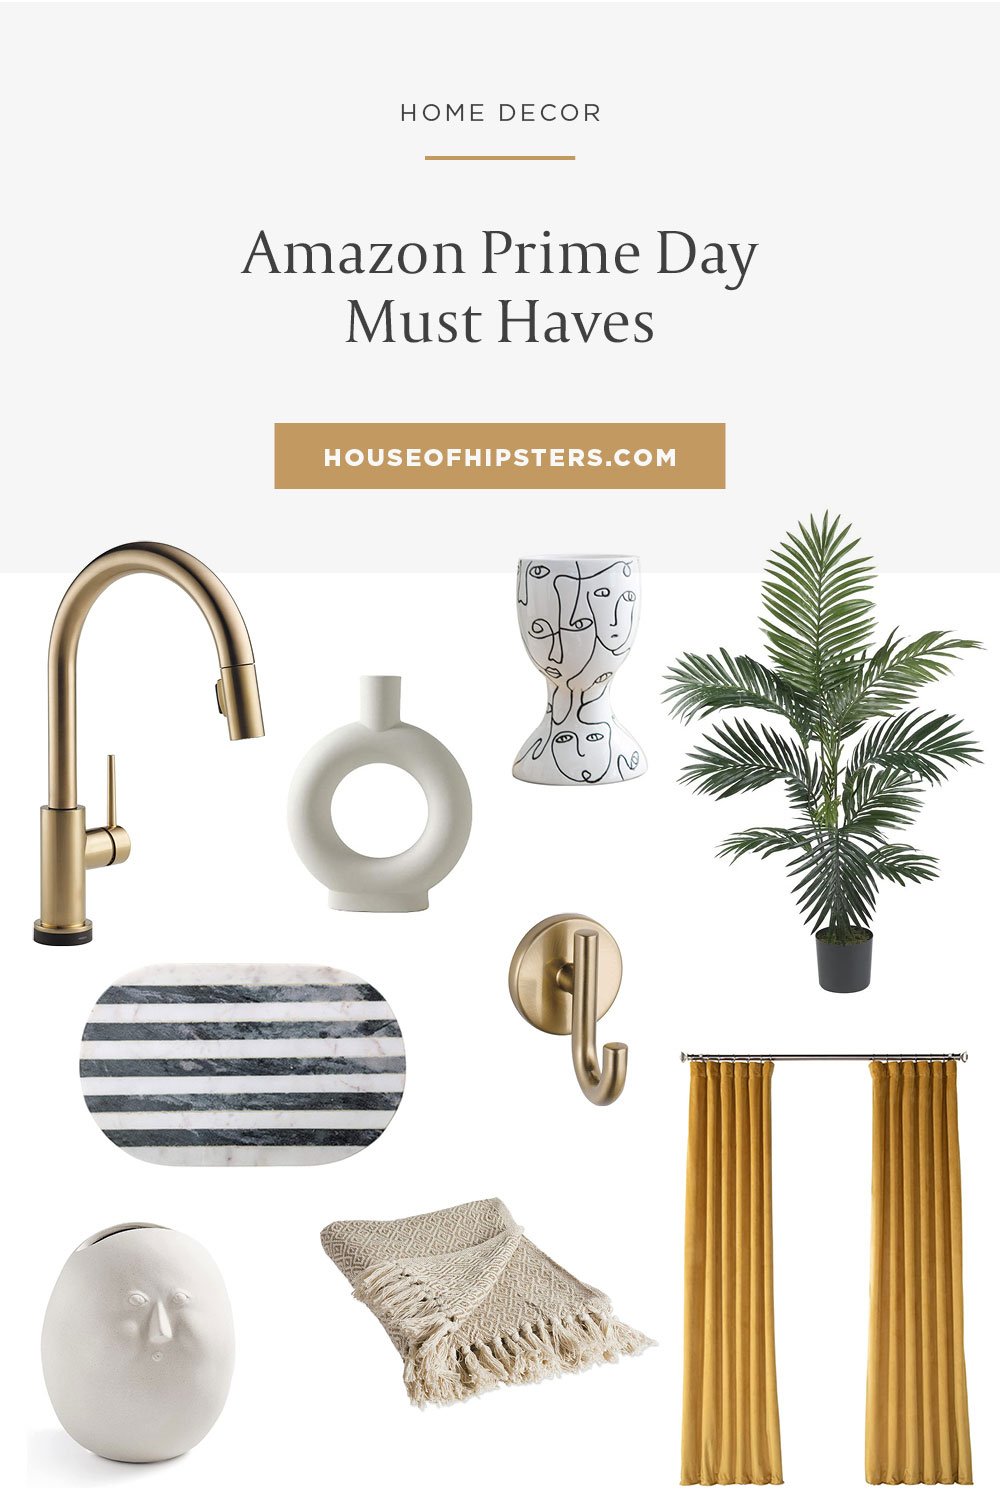 Amazon Prime Day Must Have Home Decor Deals - Rounding up the best Amazon Prime Day Deals including hidden sales on home decor and kitchen appliances